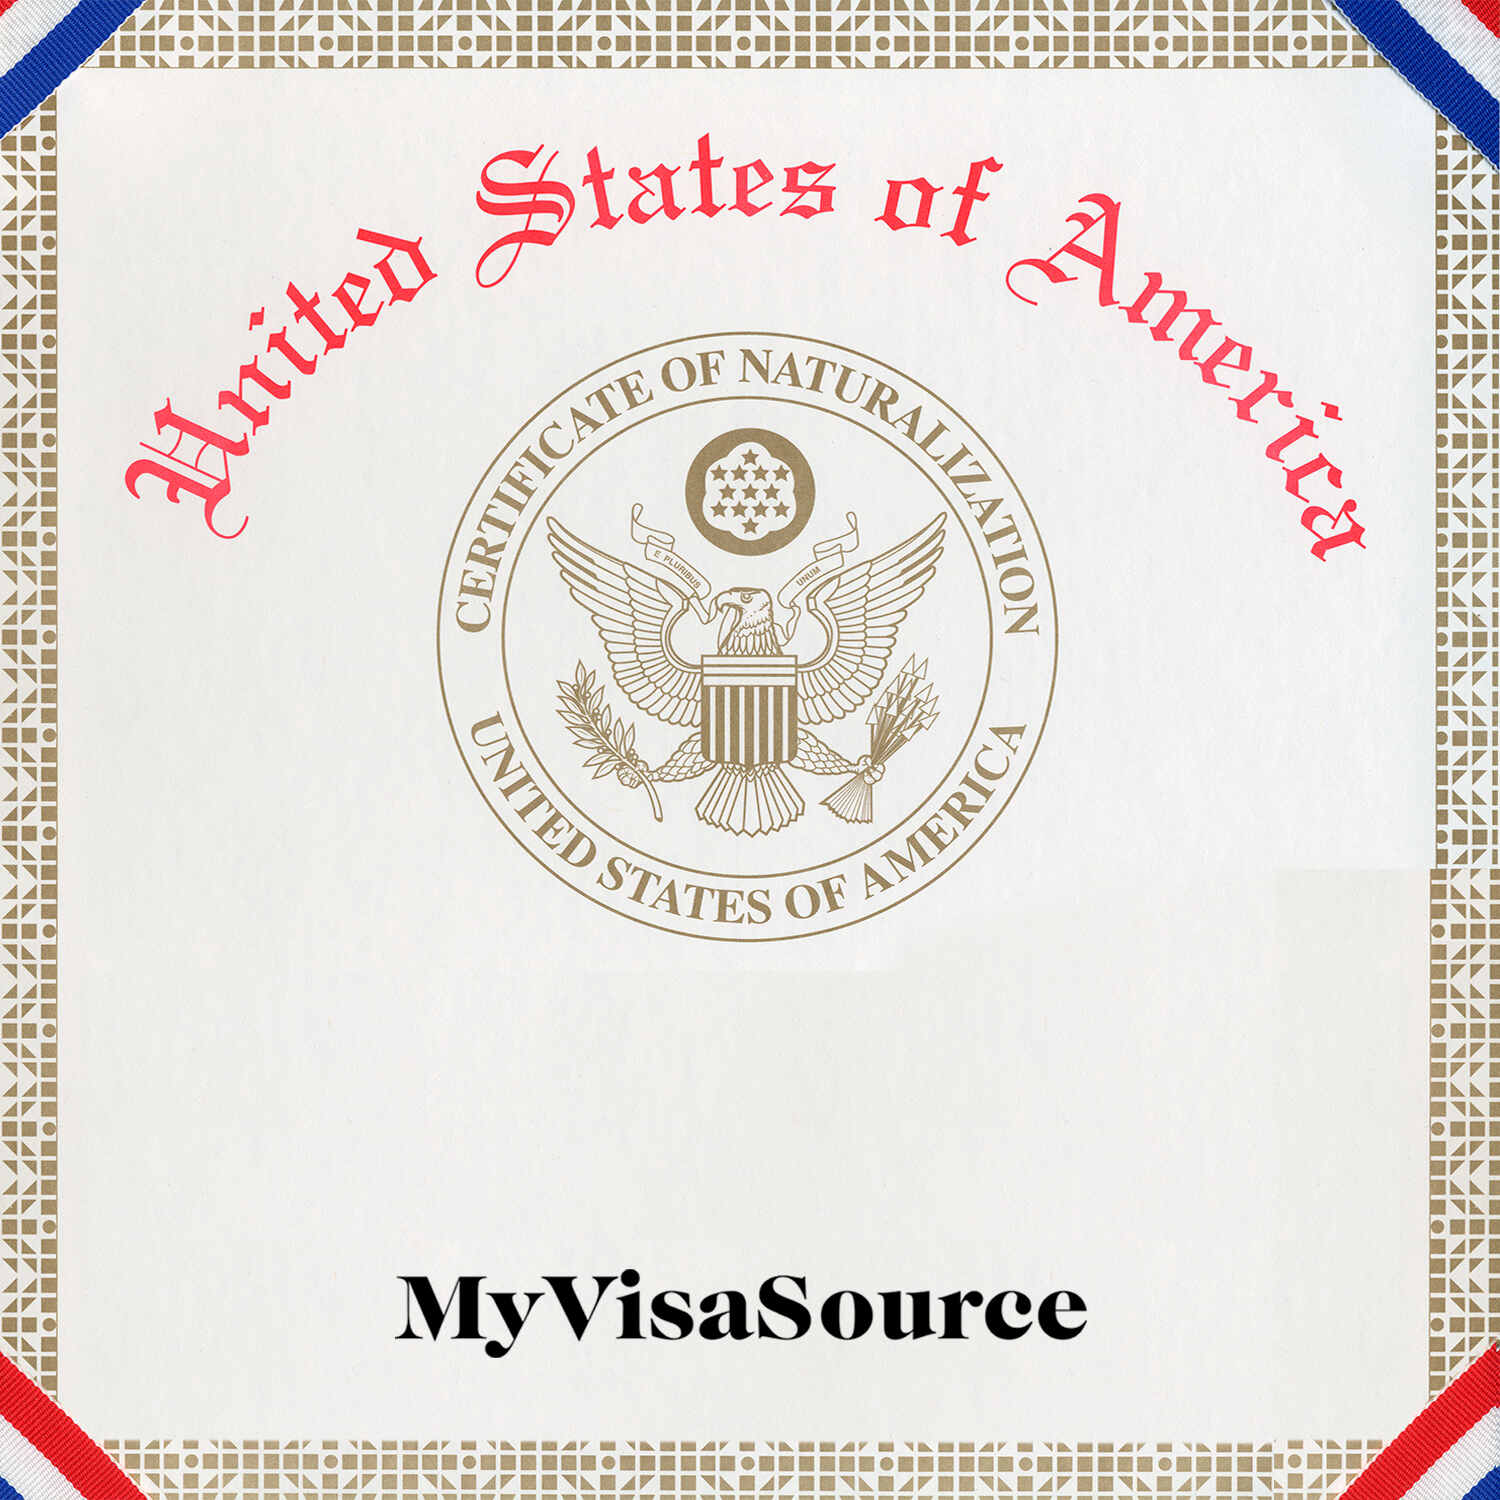 How to Replace Your Certificate of US Citizenship | My Visa Source